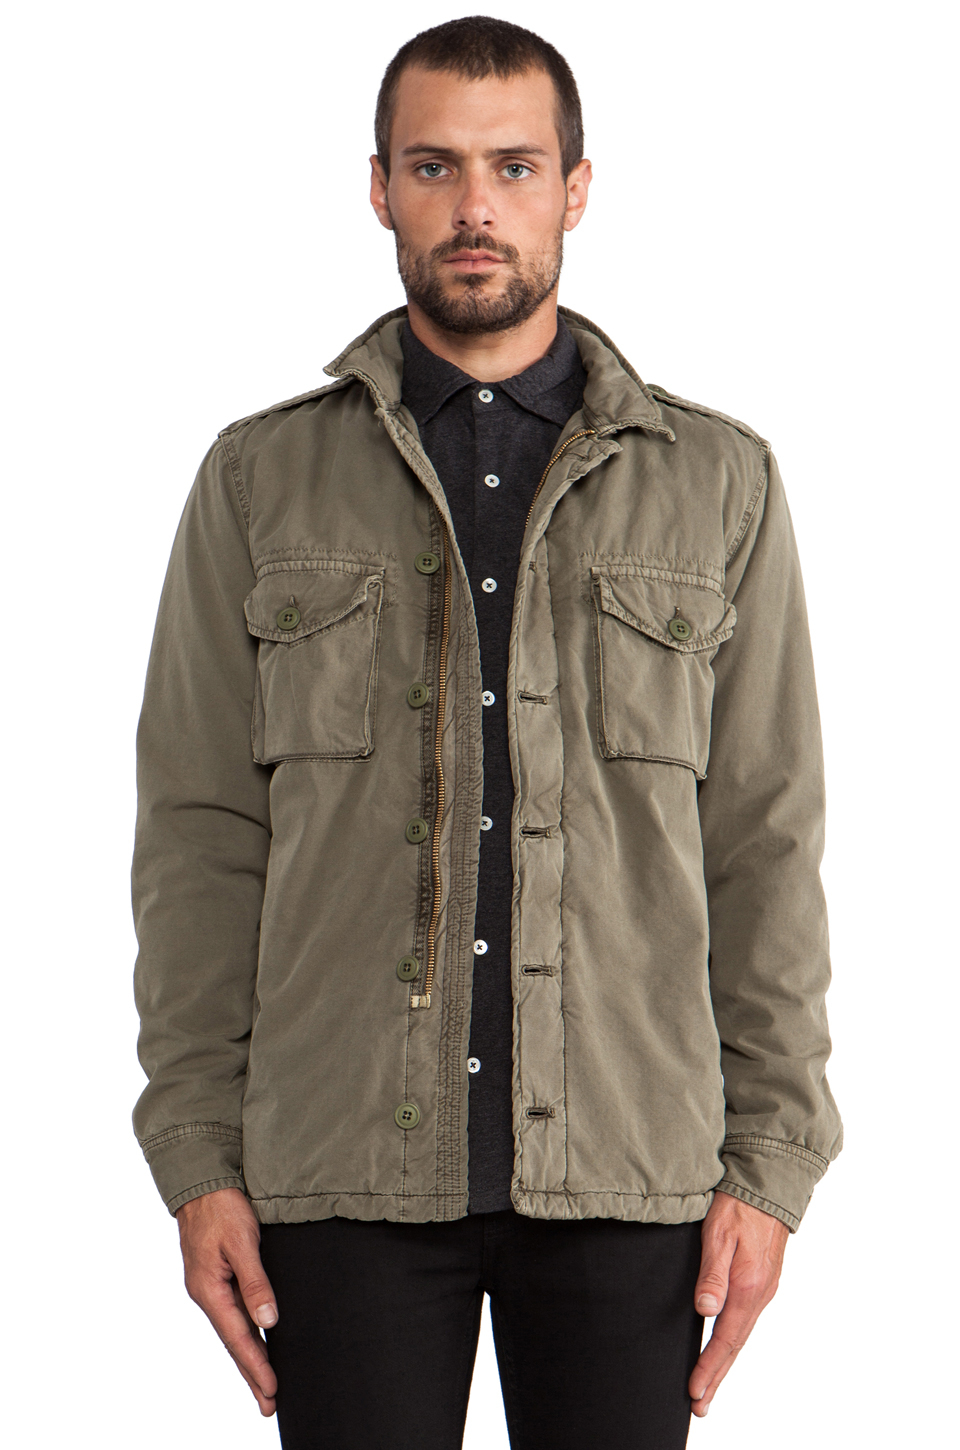 Mens Green Army Jacket - Army Military